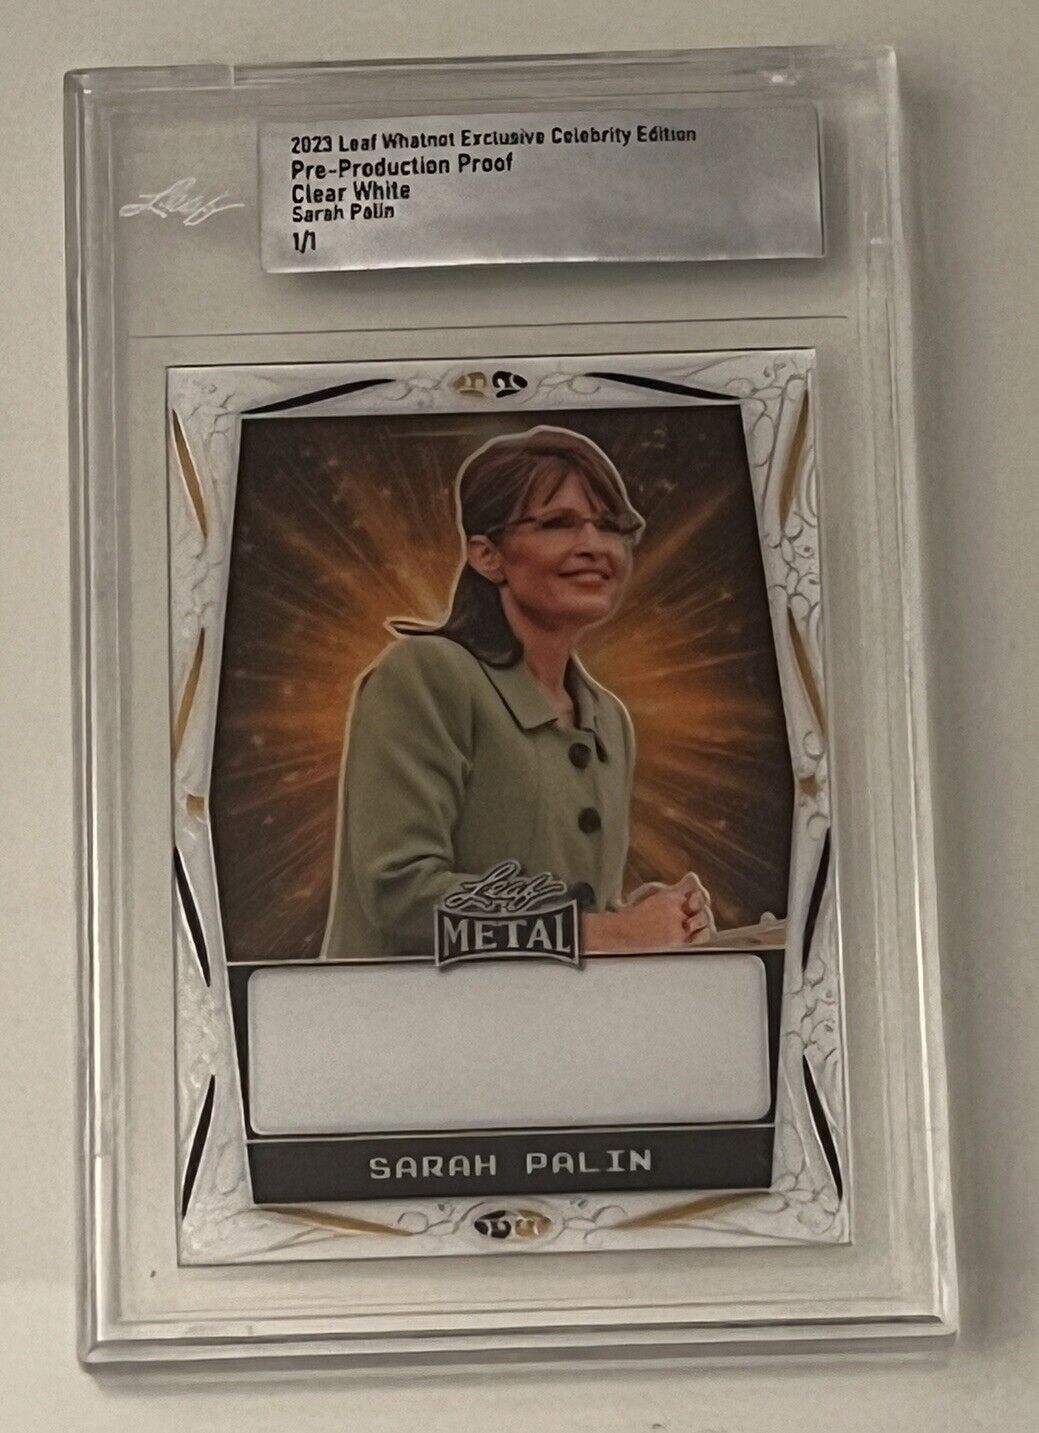 2023 Leaf Whatnot Exclusive Celebrity Edition Sarah Palin Clear White 1/1